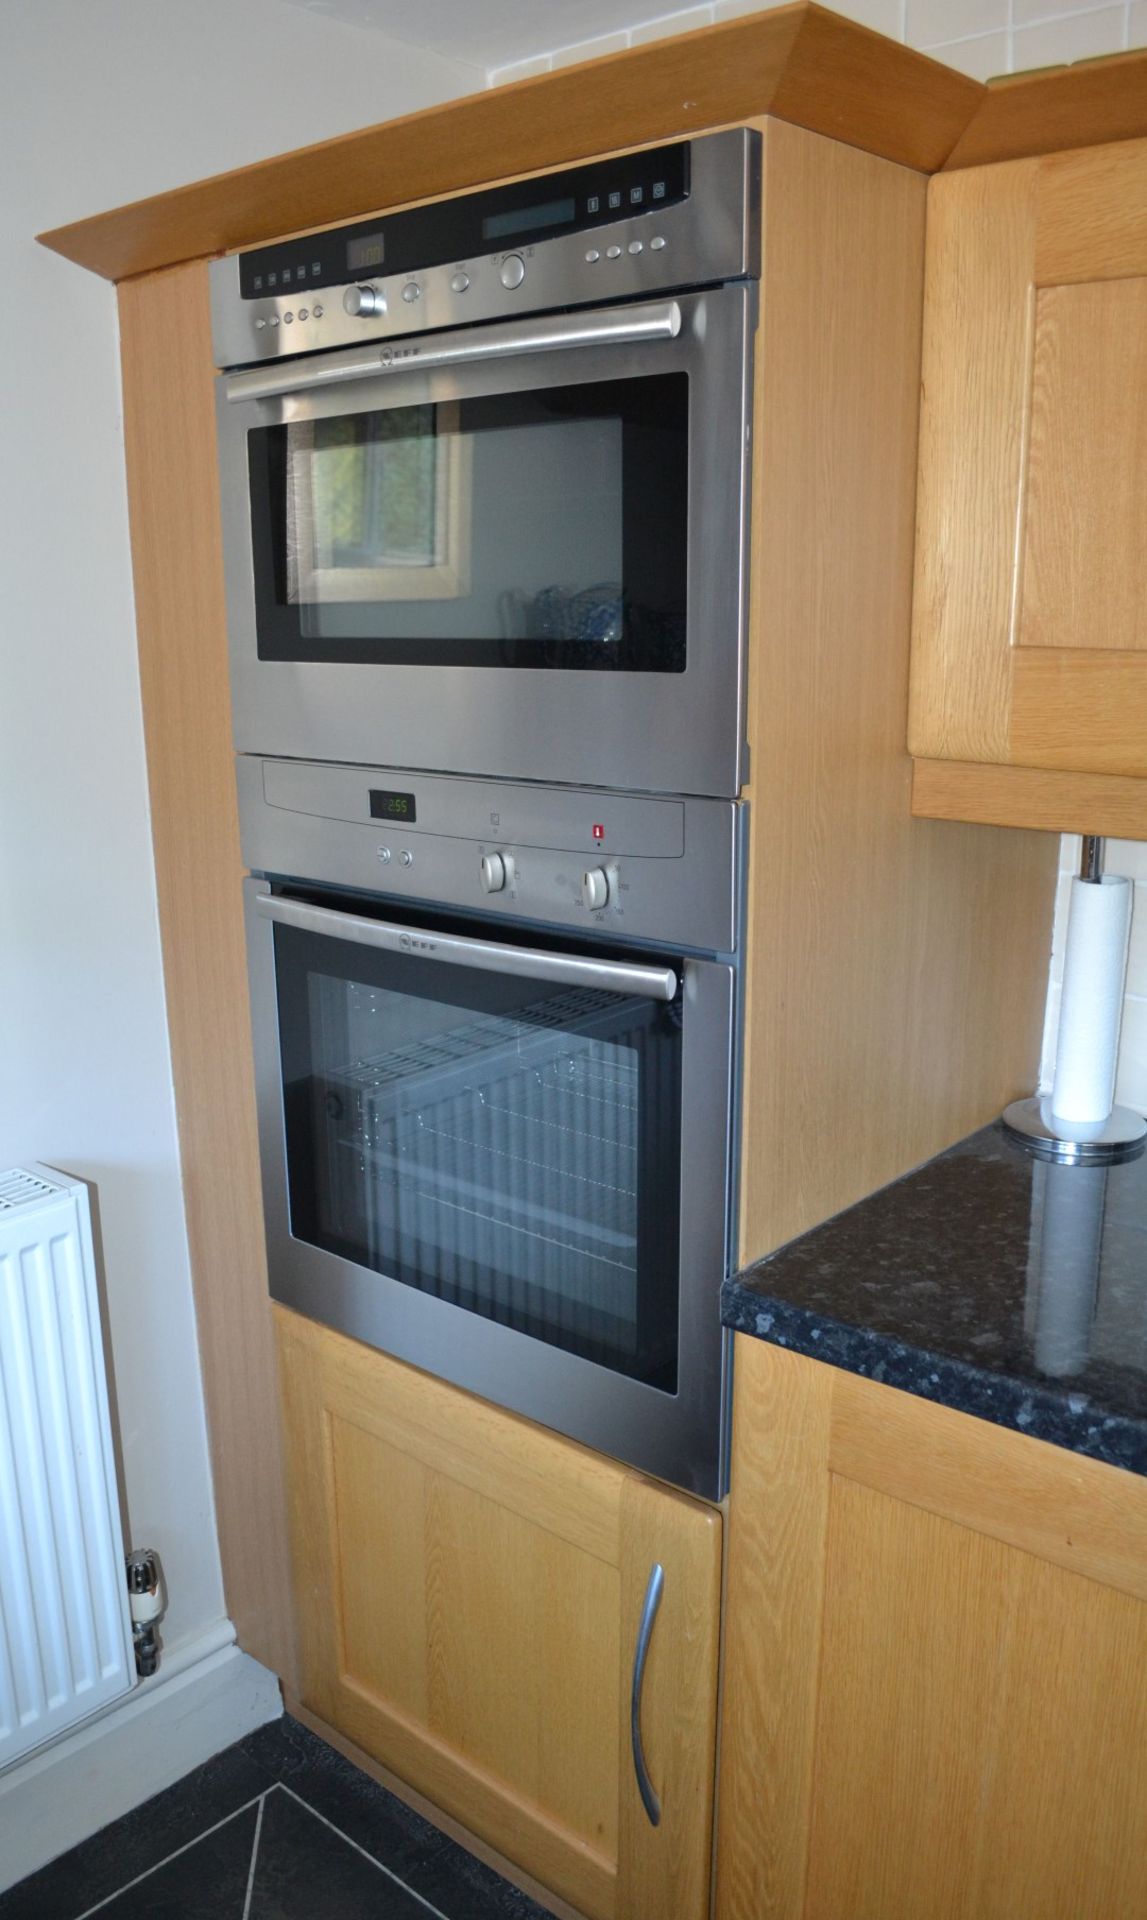 1 x Compact Fitted Kitchen With Neff and Tecnik Appliances - CL322 - Location: Pleasington, BB2 - * - Image 5 of 35